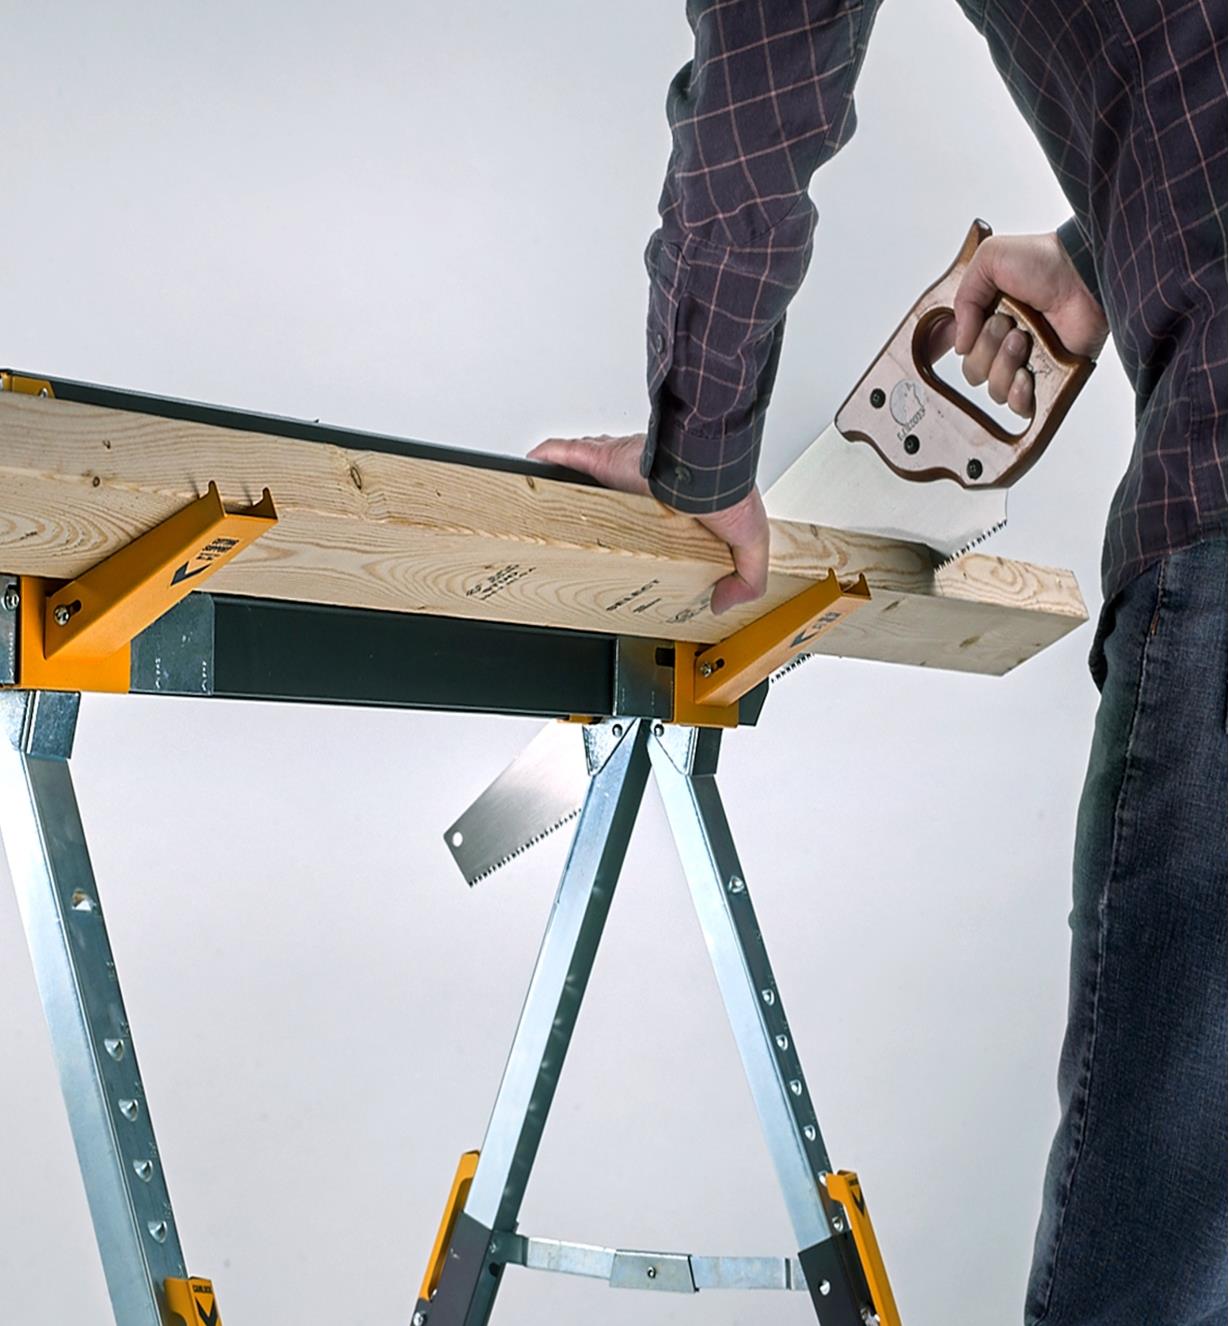 Using a handsaw to cut lumber held horizontally on the fold-out brackets of a C700 sawhorse